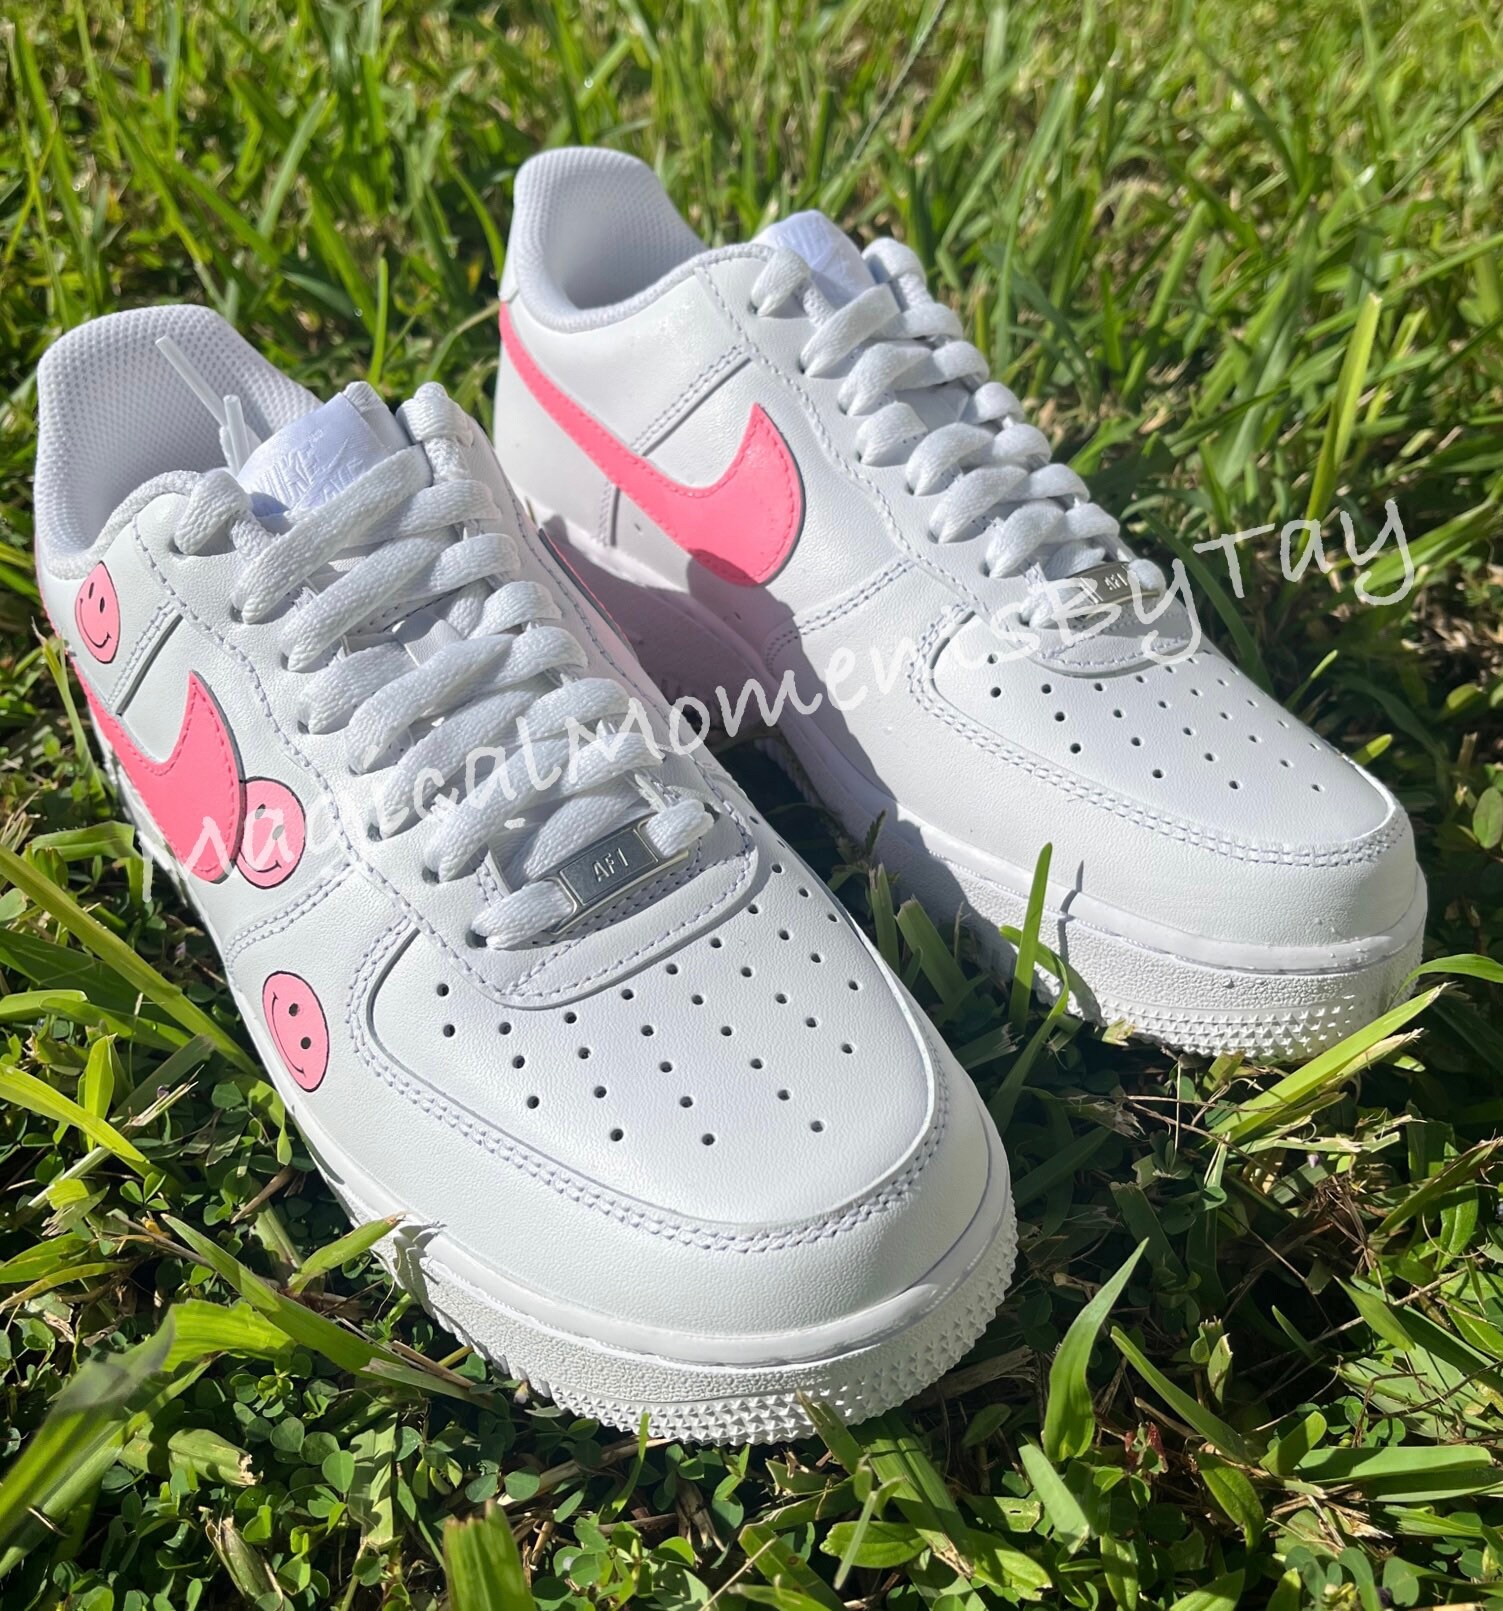 Smiley Face Air Force 1 Air Force 1s Custom Air Force 1 - Etsy